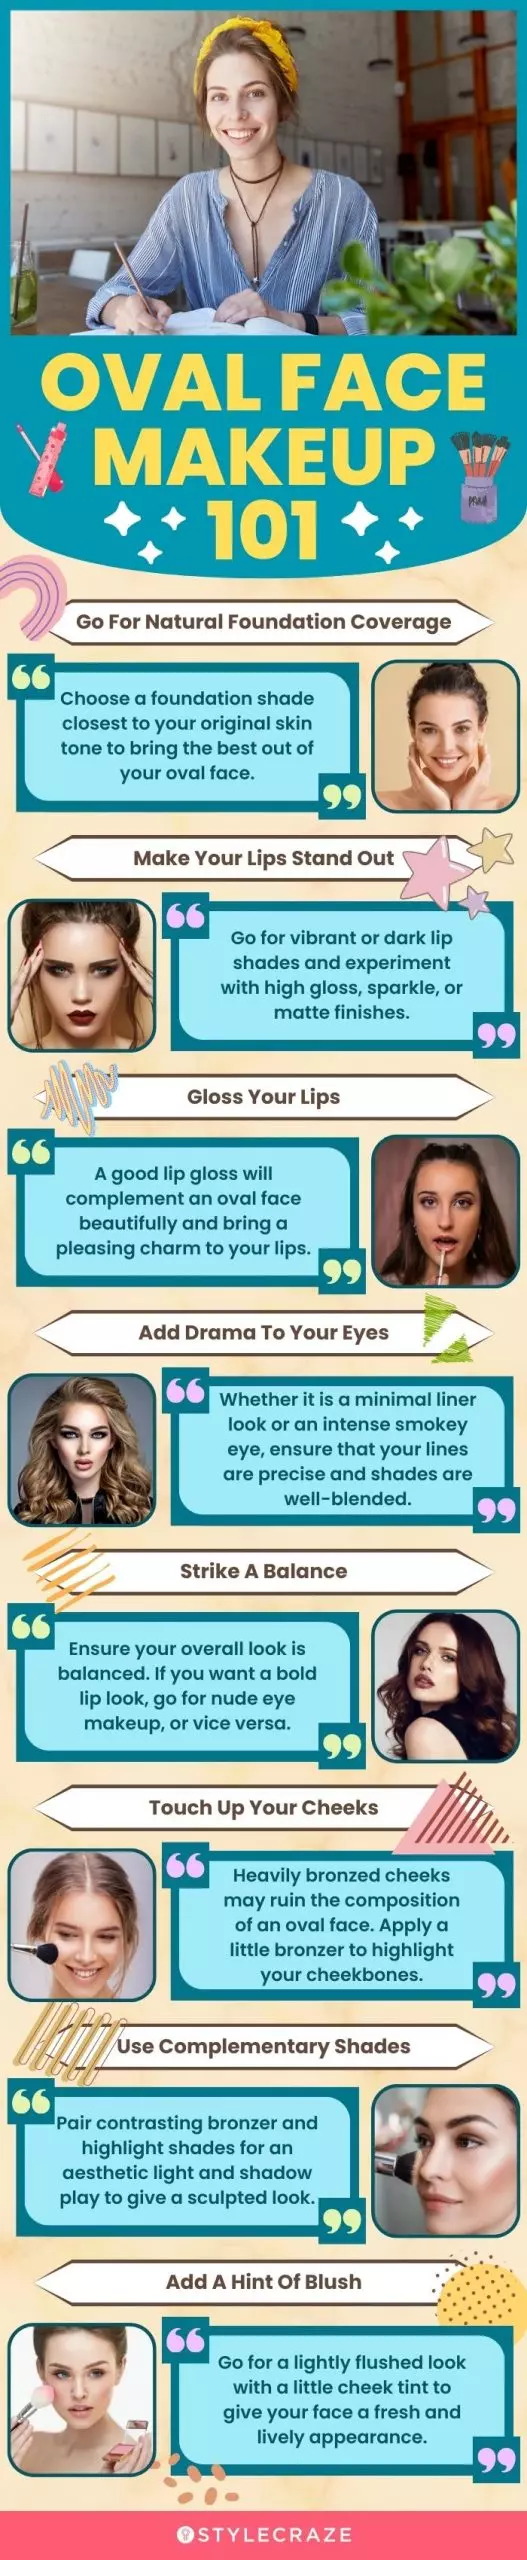 oval face makeup 101 (infographic)